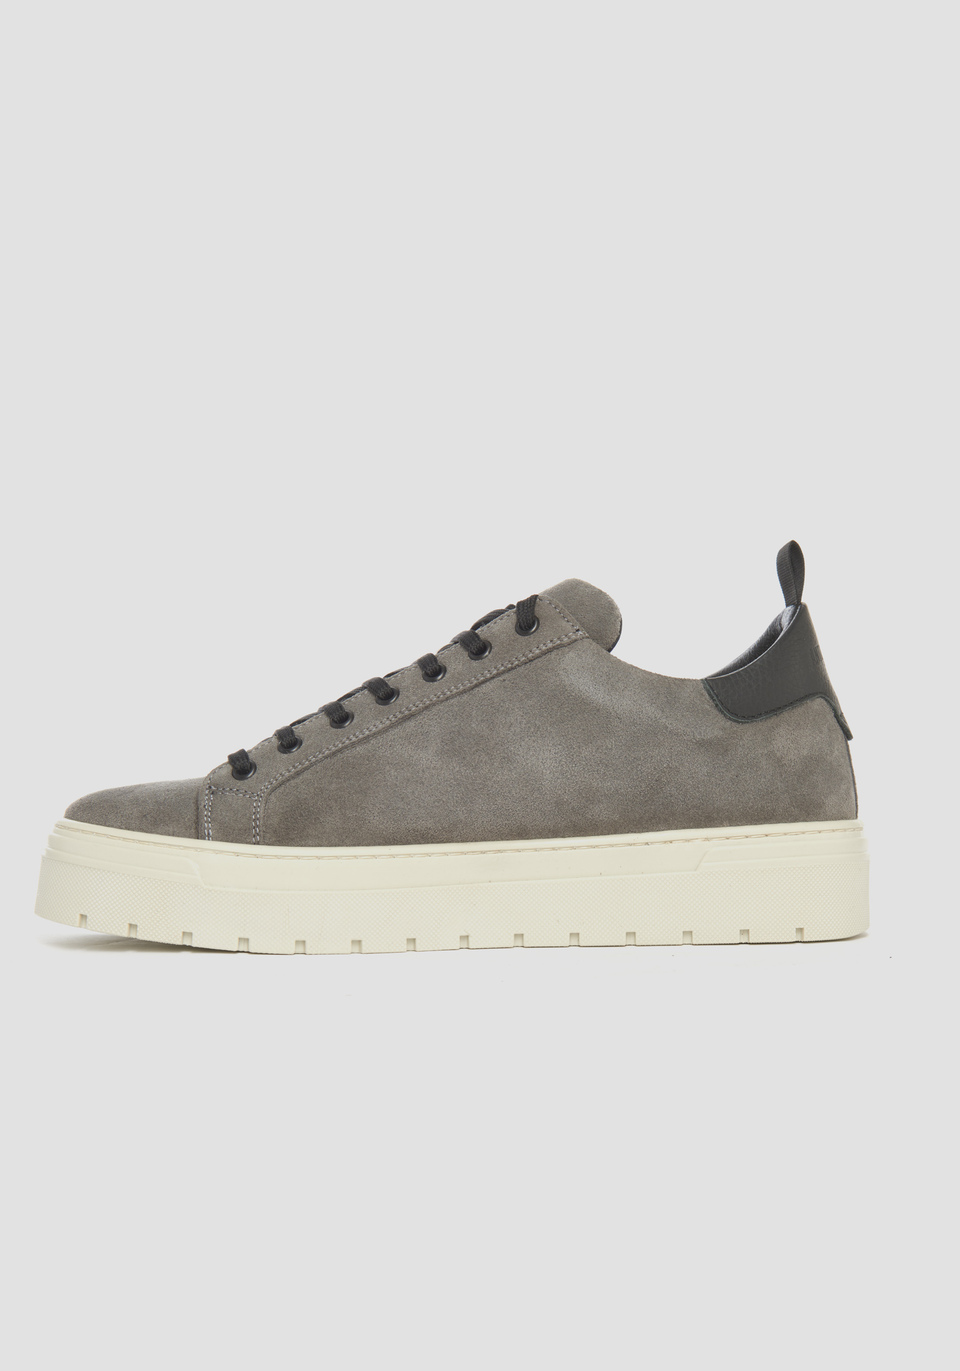 "METAL BOLD" LOW-TOP SNEAKERS IN SUEDE WITH LEATHER DETAILS - Antony Morato Online Shop